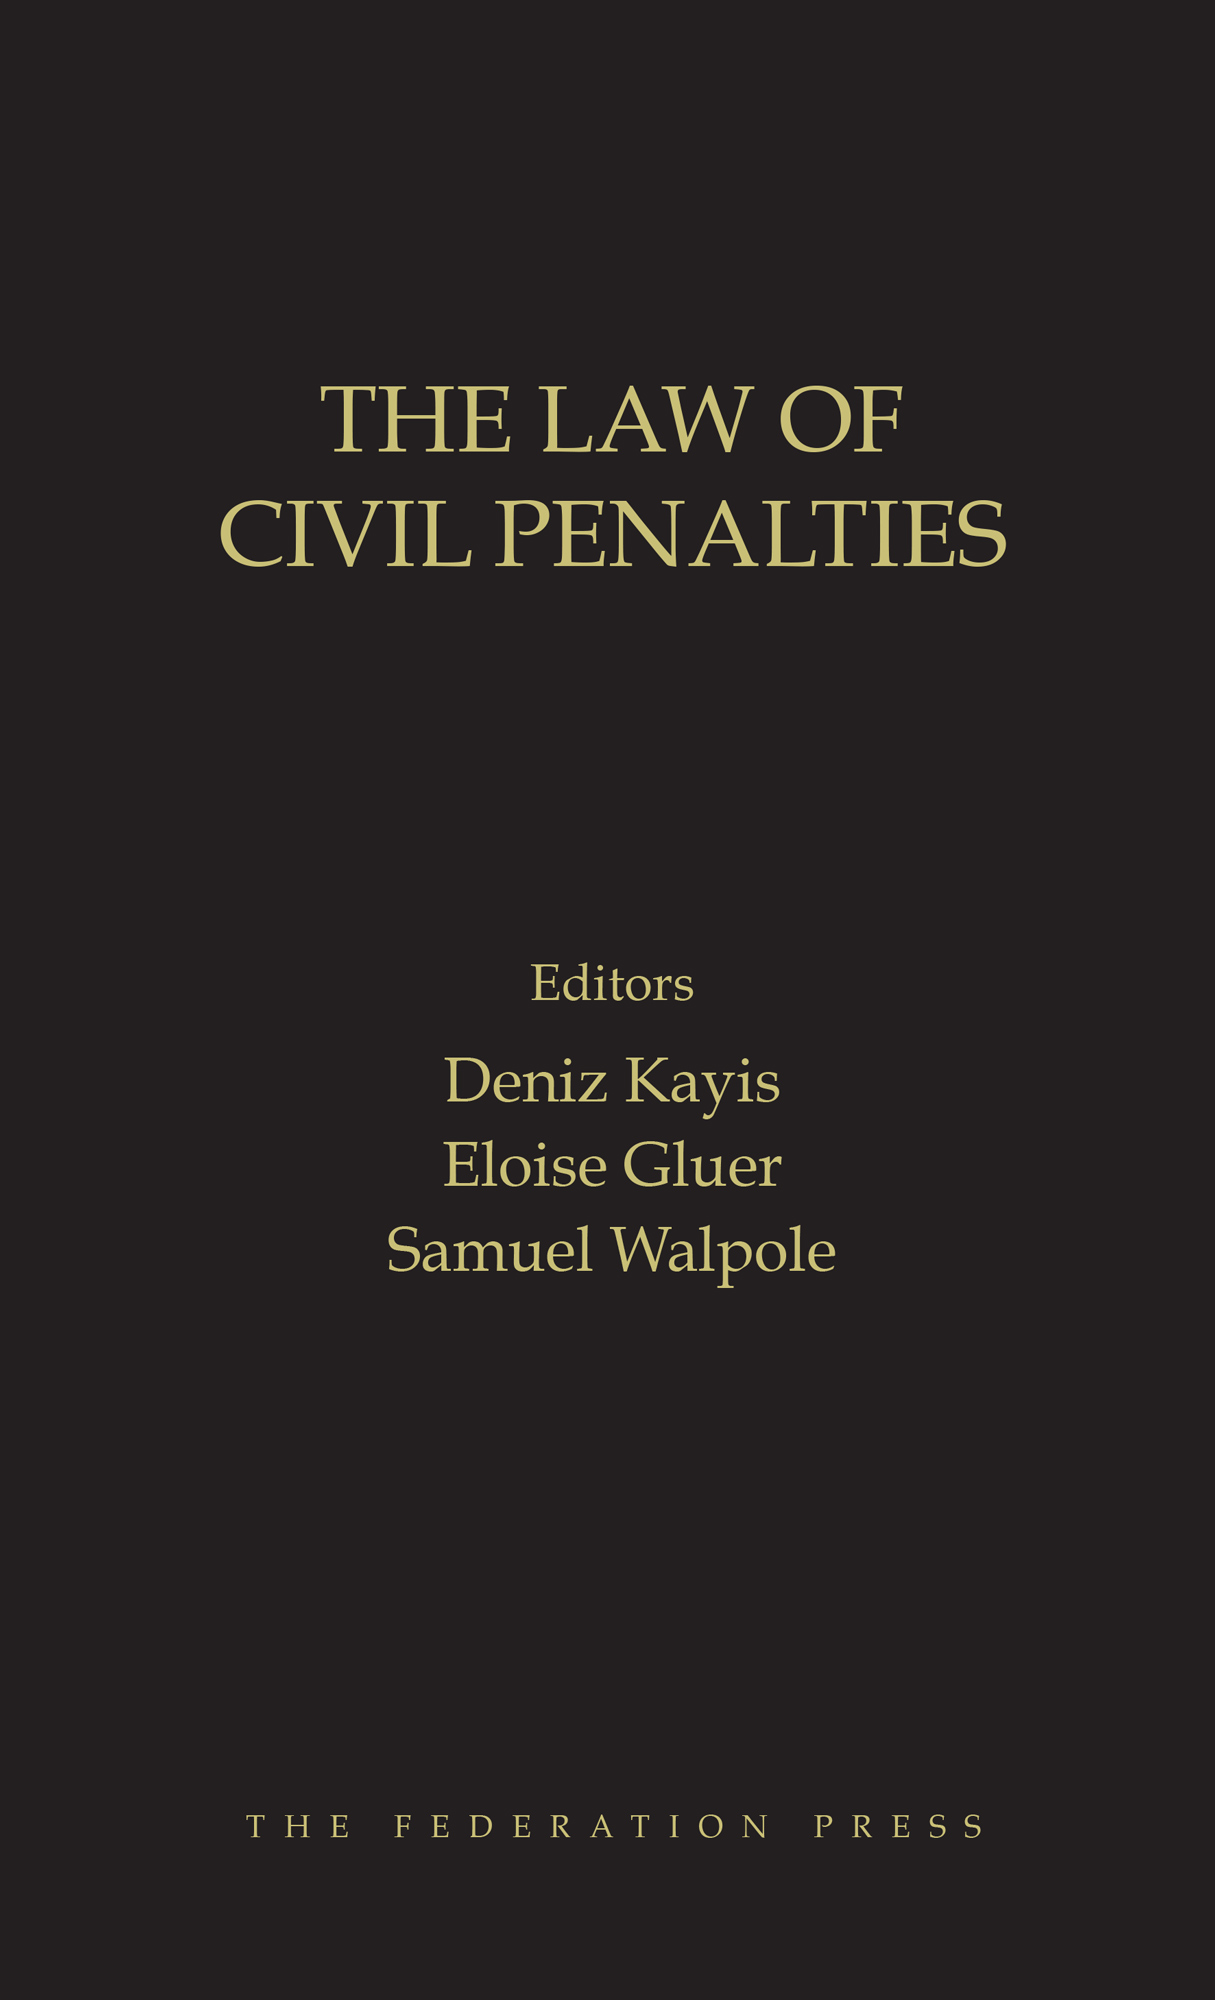 The Law of Civil Penalties